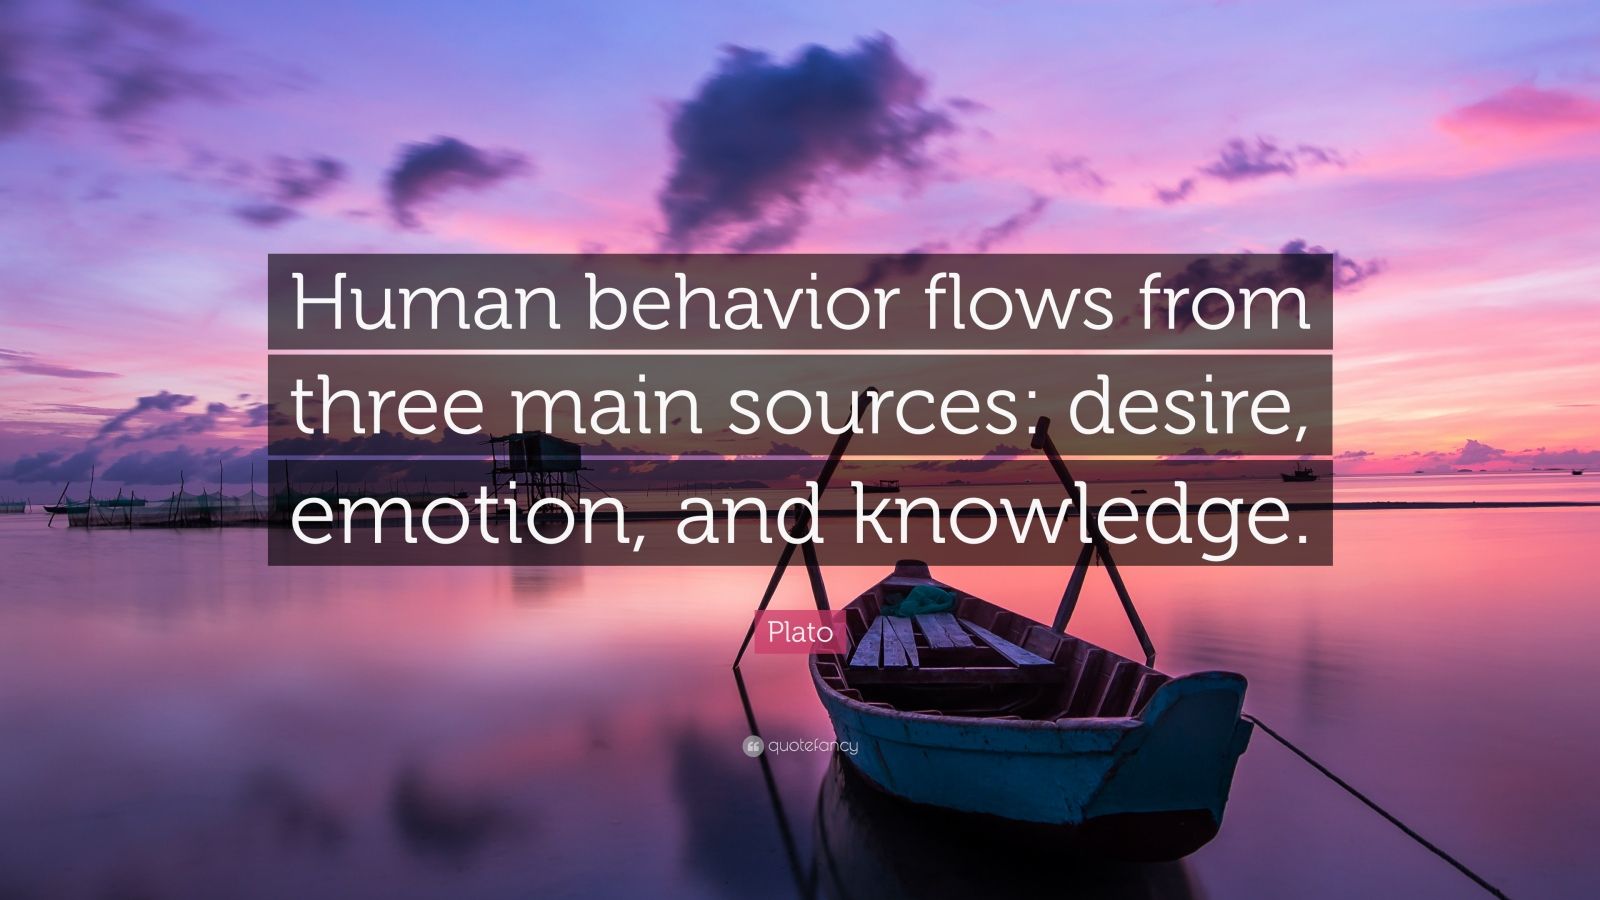 Plato Quote: “Human behavior flows from three main sources: desire